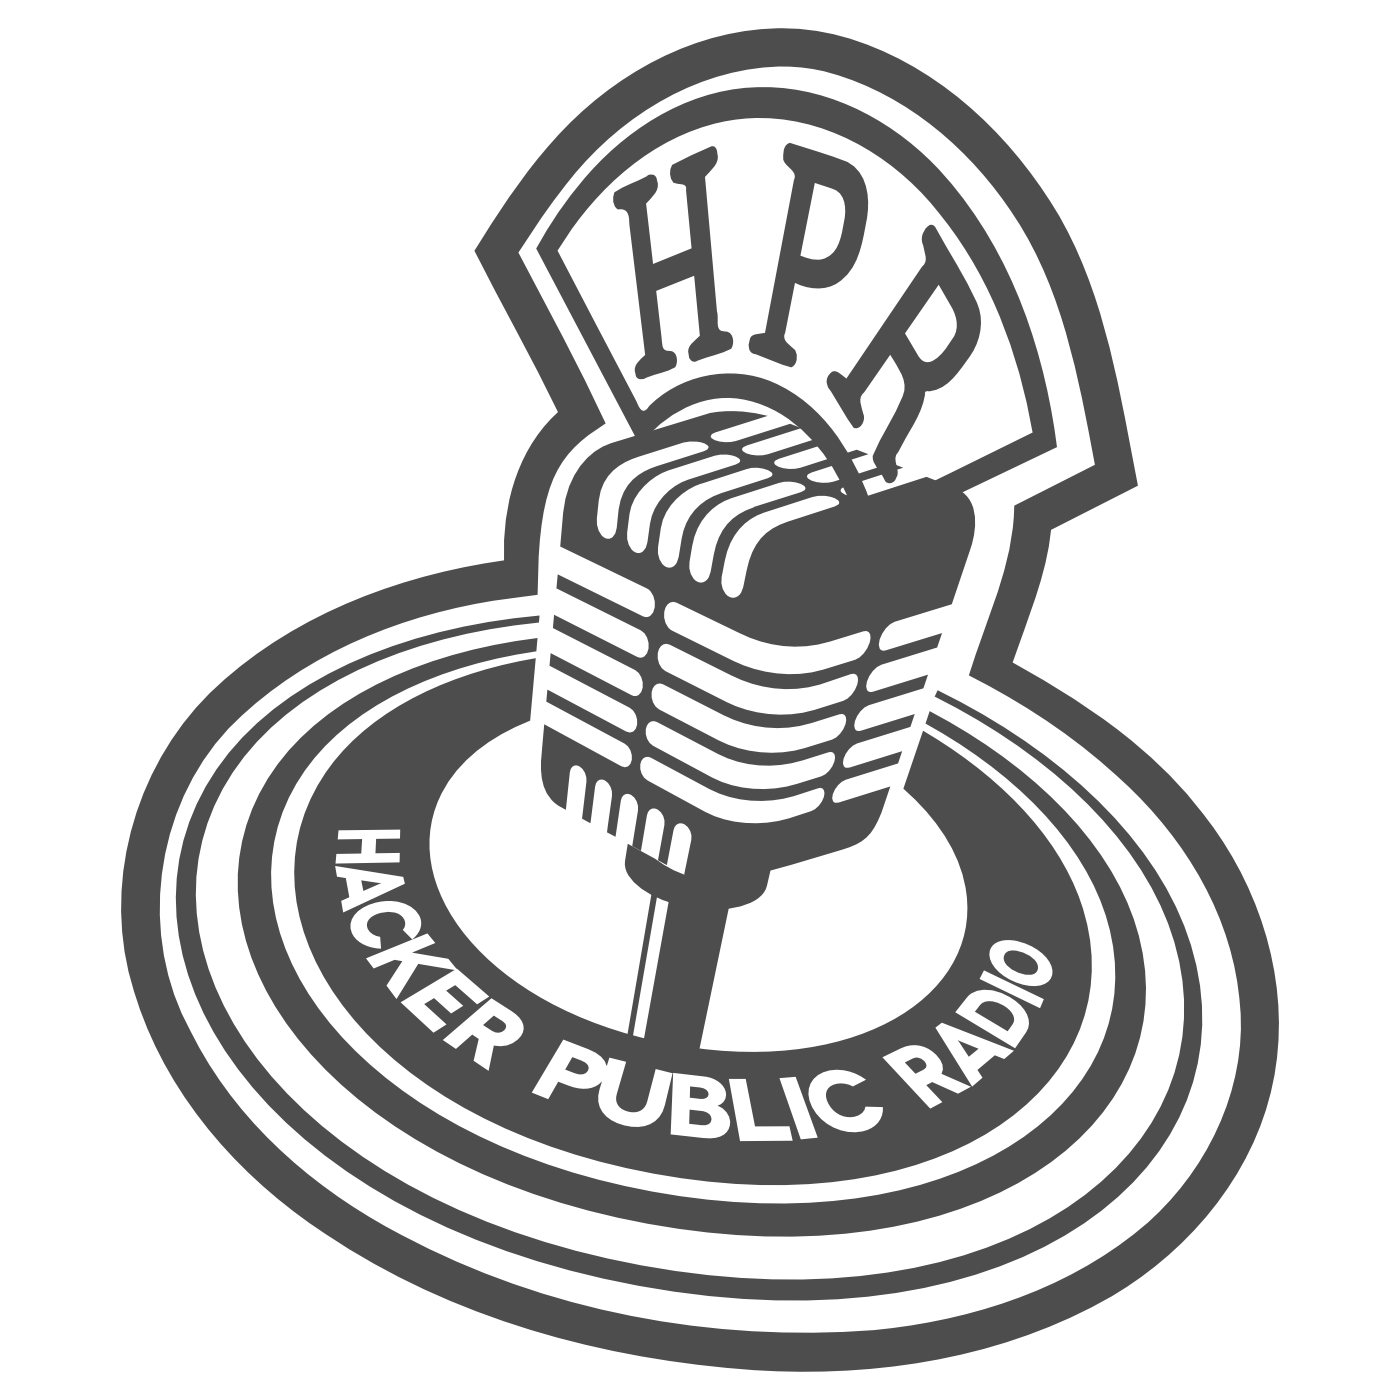 HPR4105: My story how I found a cure for my obesity